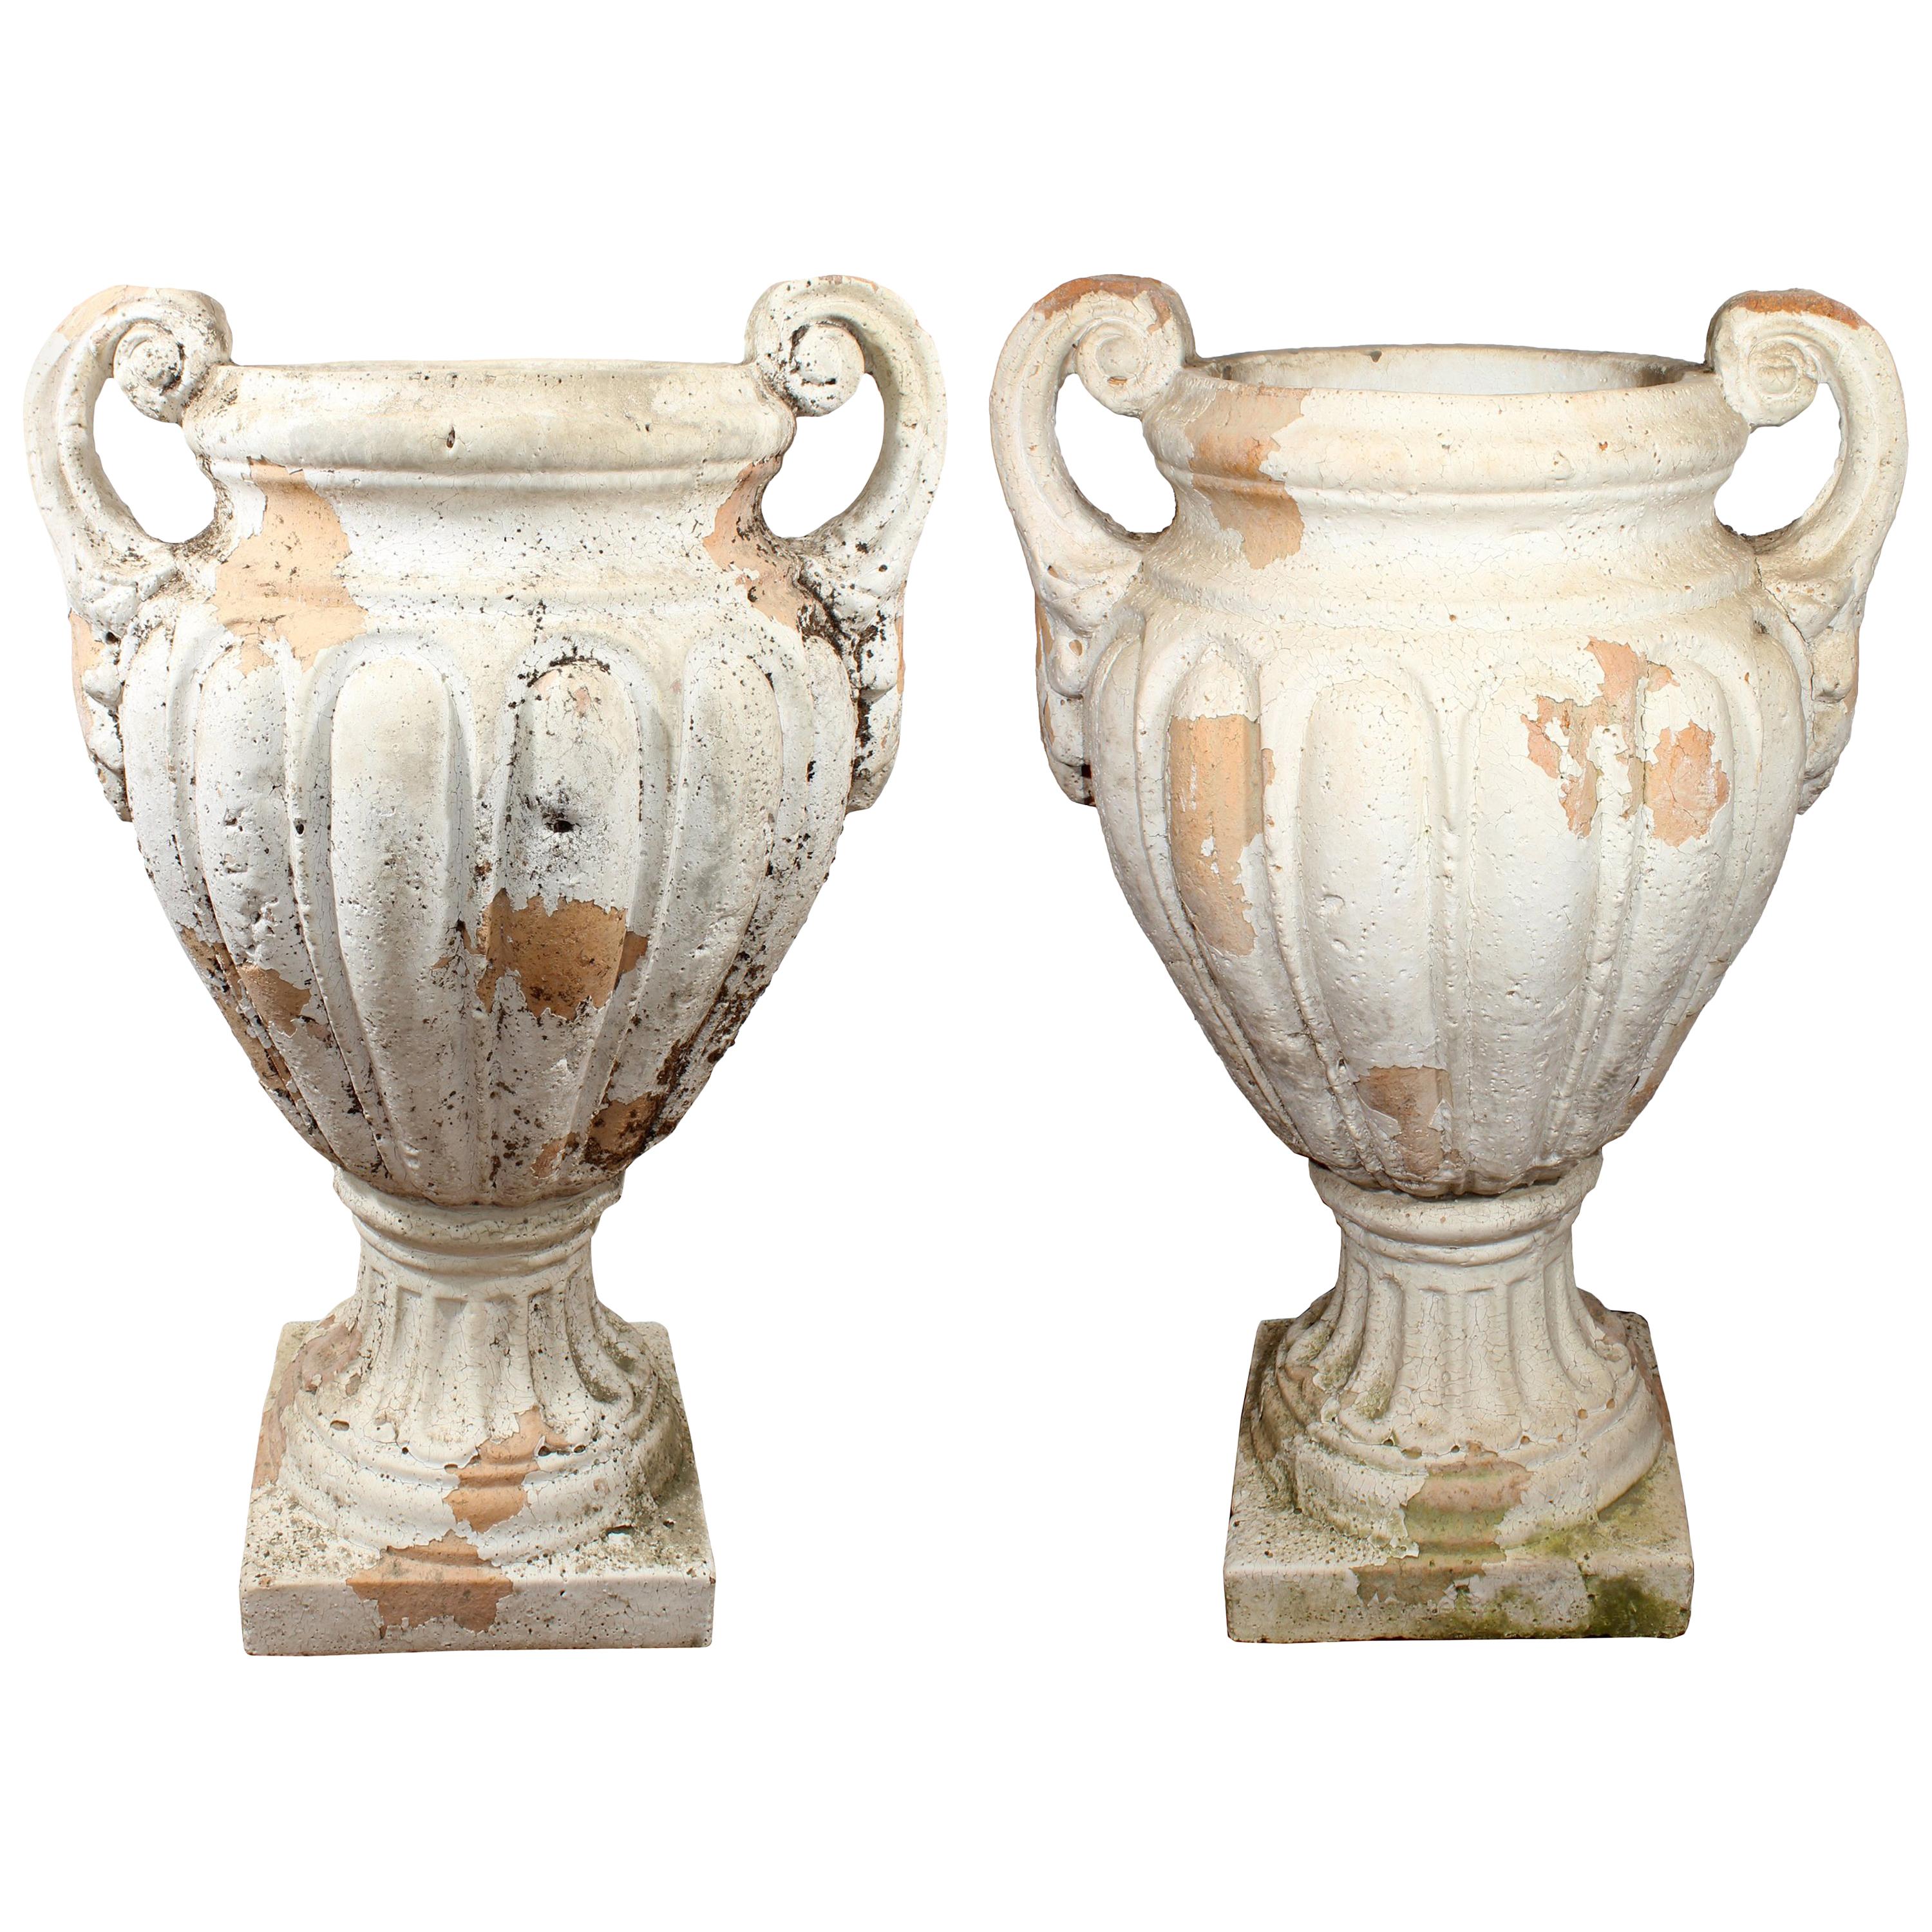 Pair of Natural French Terracotta Urns with Handles